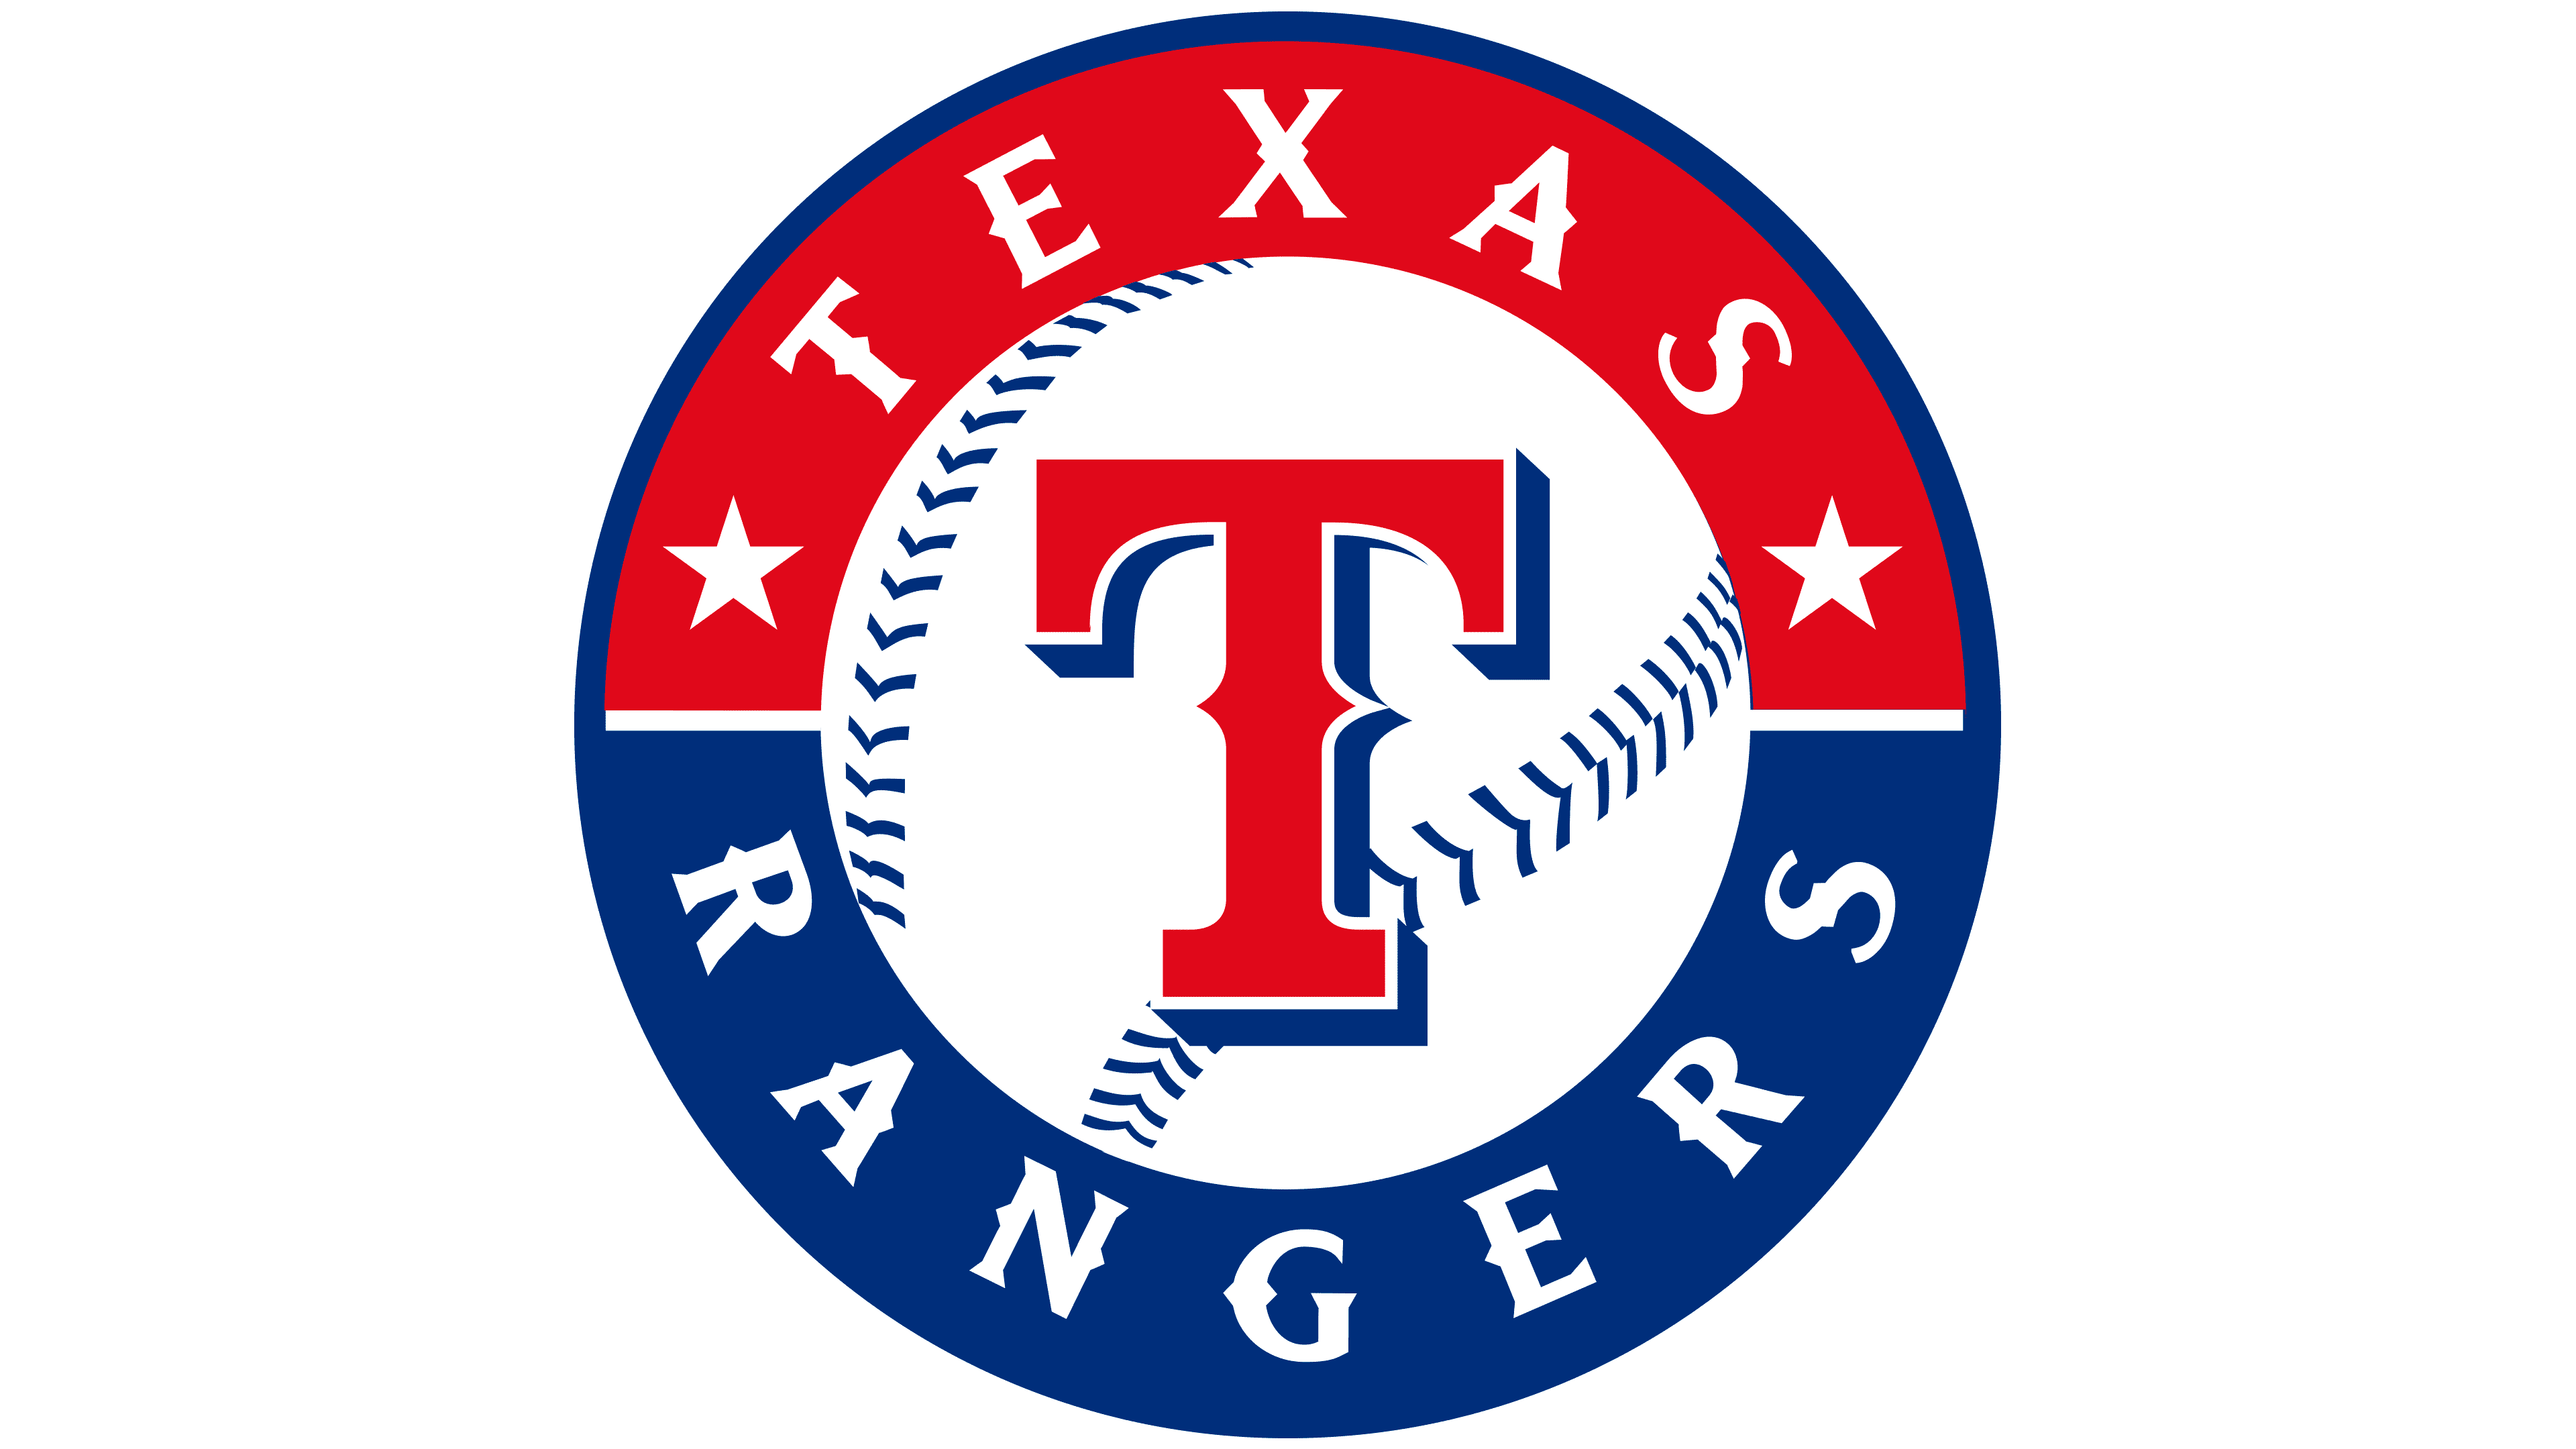 Texas Rangers Logo, PNG, Symbol, History, Meaning